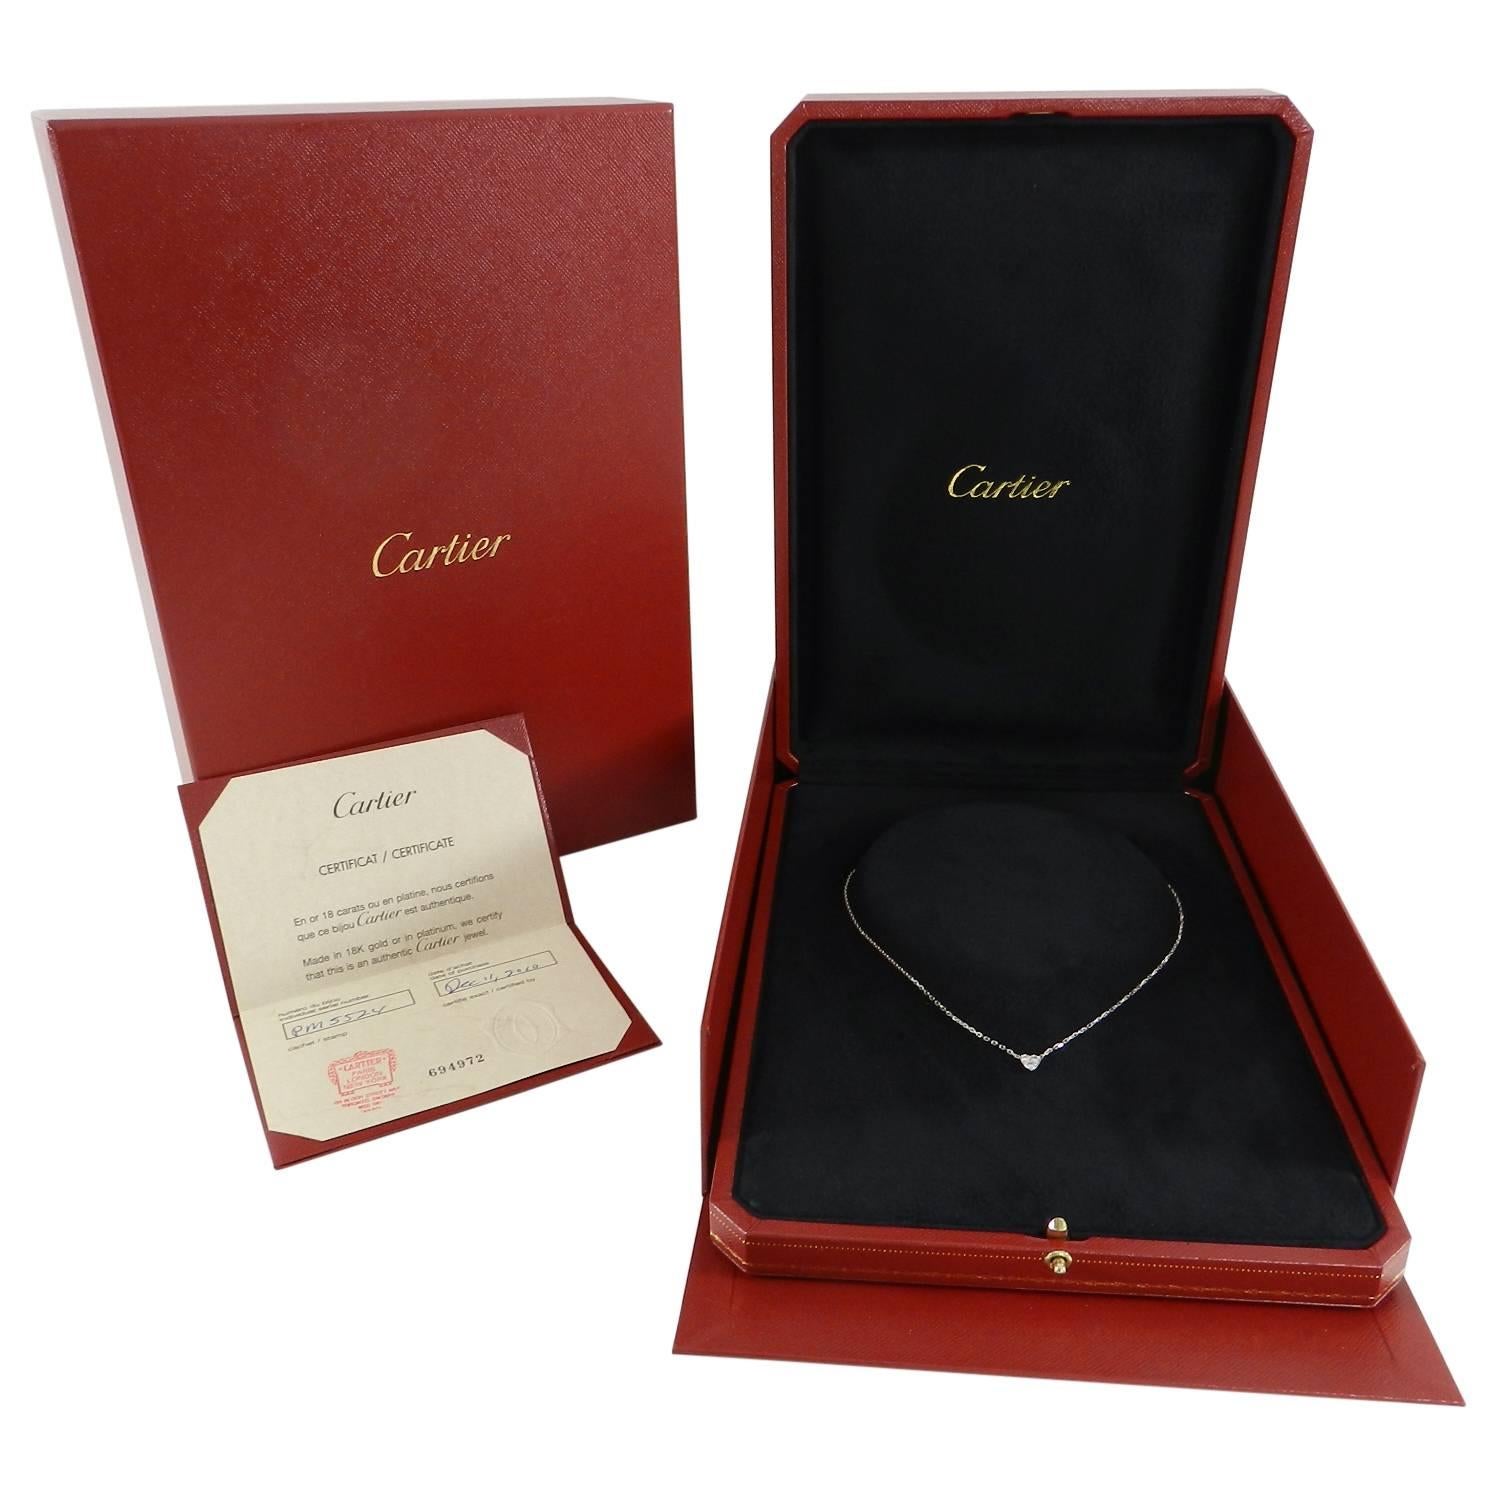 Cartier Heart of Cartier Mini 18k White Gold Diamond Heart Necklace.  Necklace fastens at 15” and 16”.  Heart pendant is set with 3 white diamonds and measures about 5mm wide x 6mm tall.  Excellent pre-owned condition - as new.  Includes large